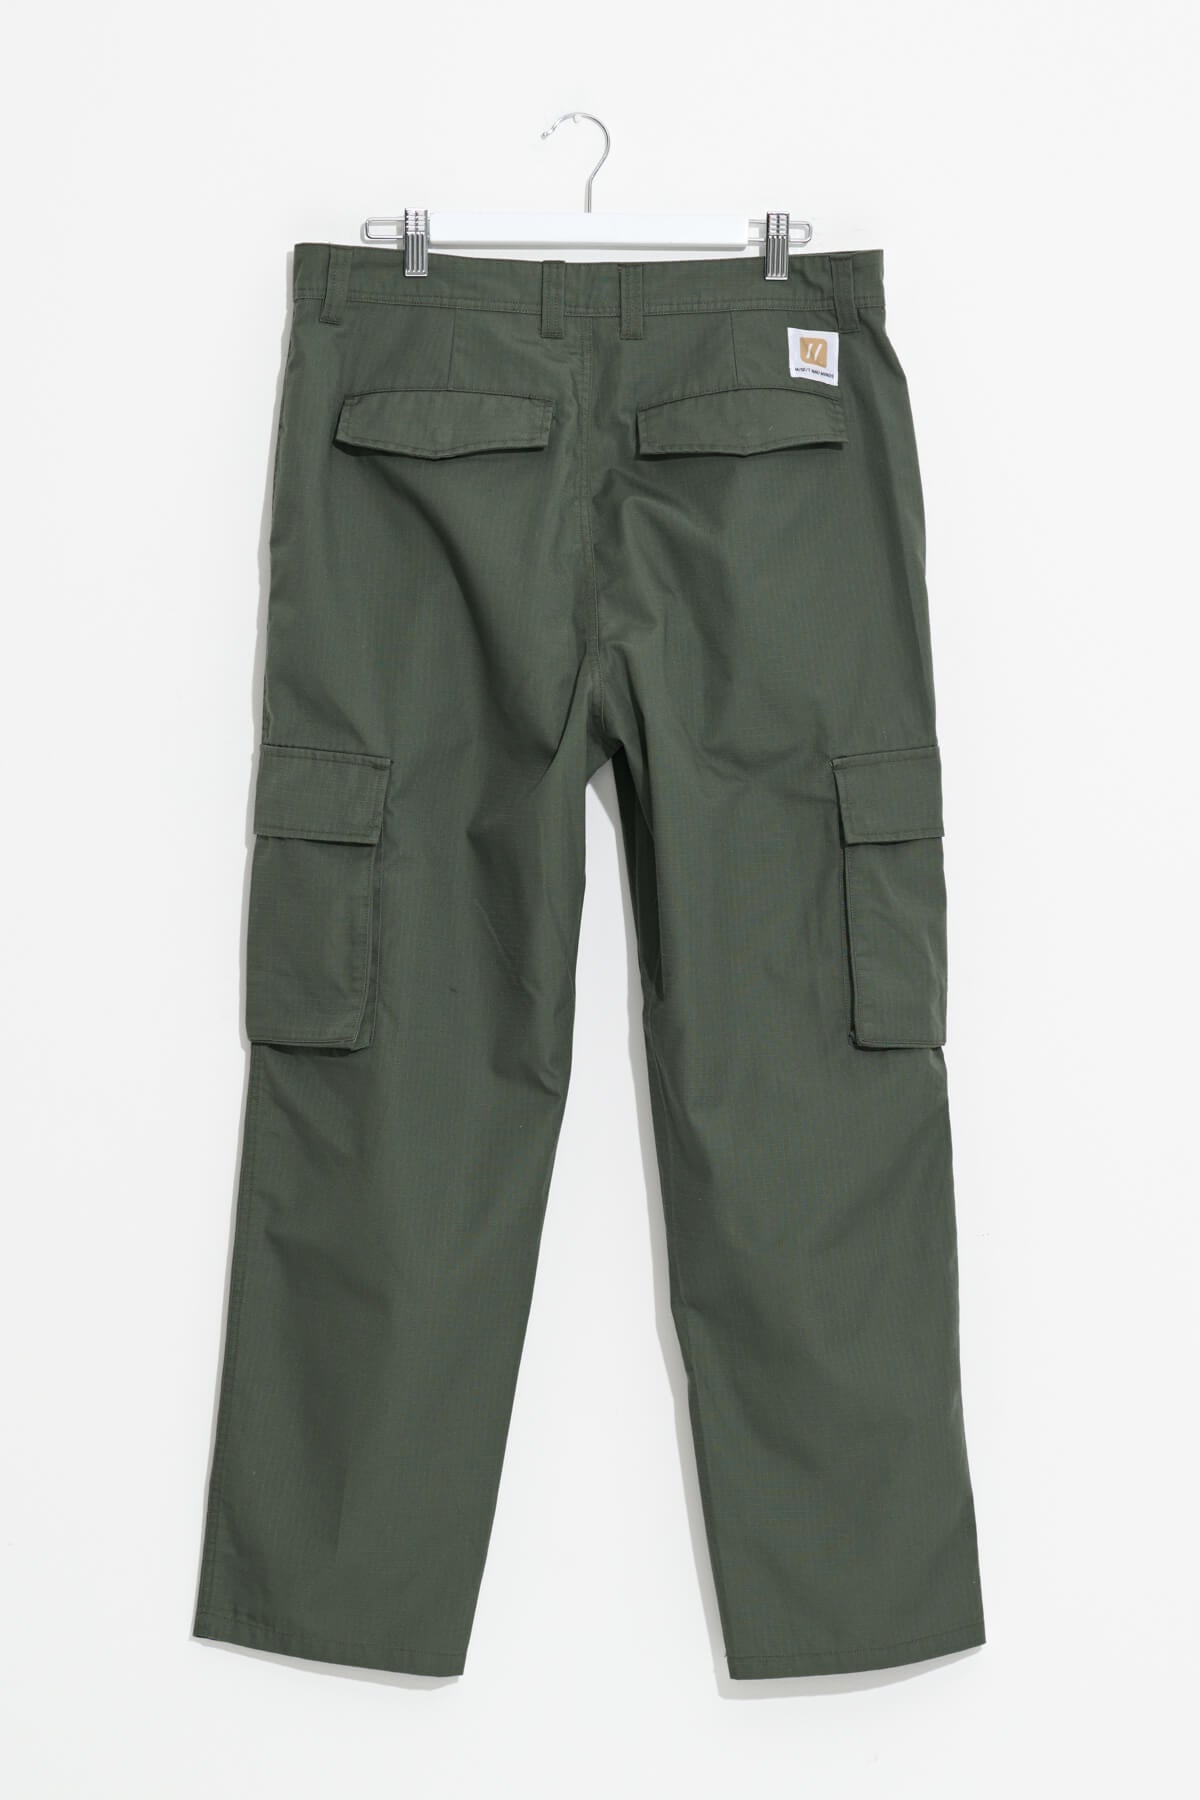 Misfit Shapes - Green Onions Cargo Pant - Army Ripstop